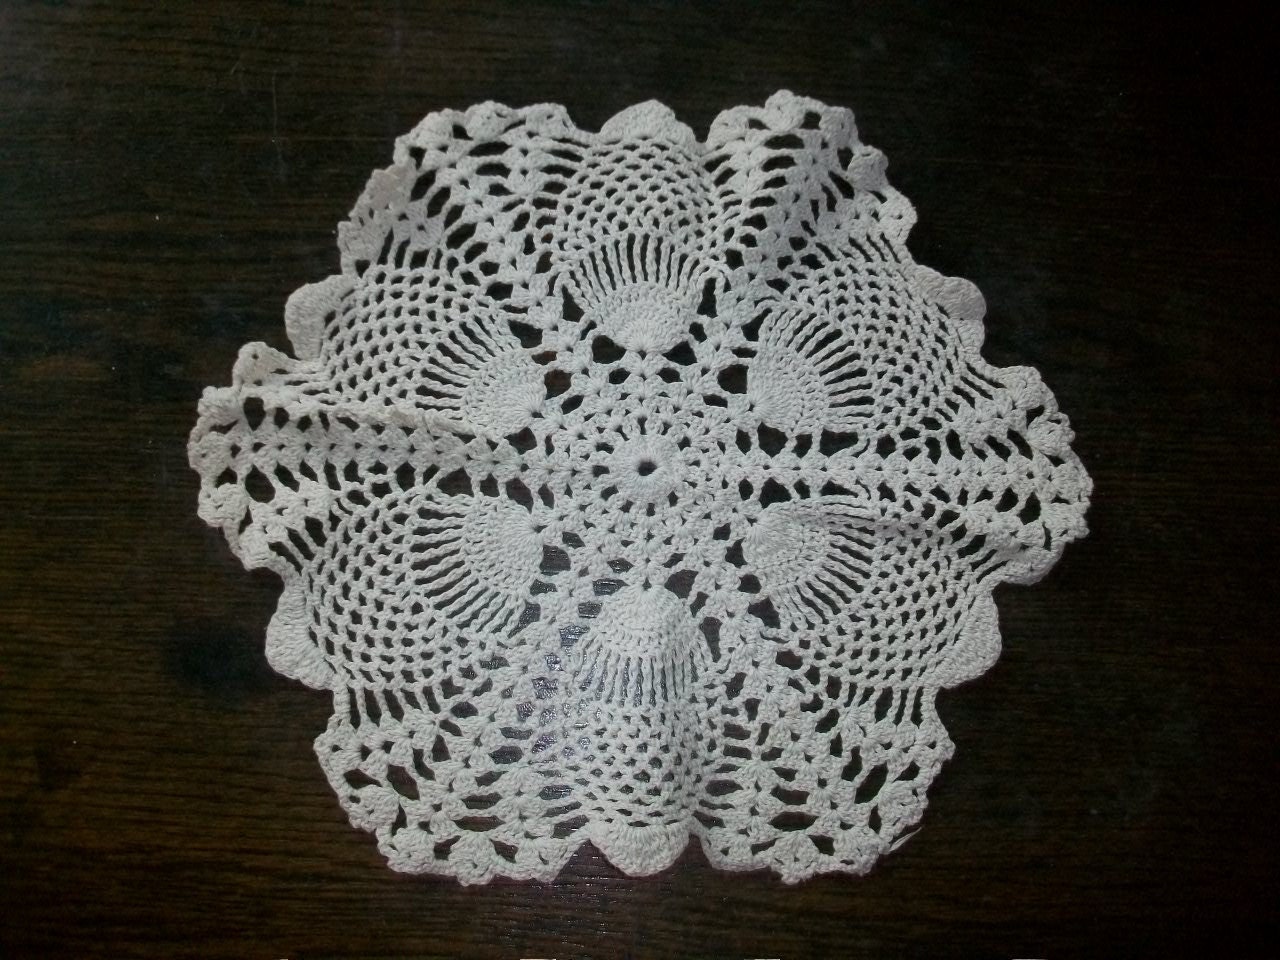 Antique Doily Crocheted Lace Off White Peacock by RedRiverAntiques